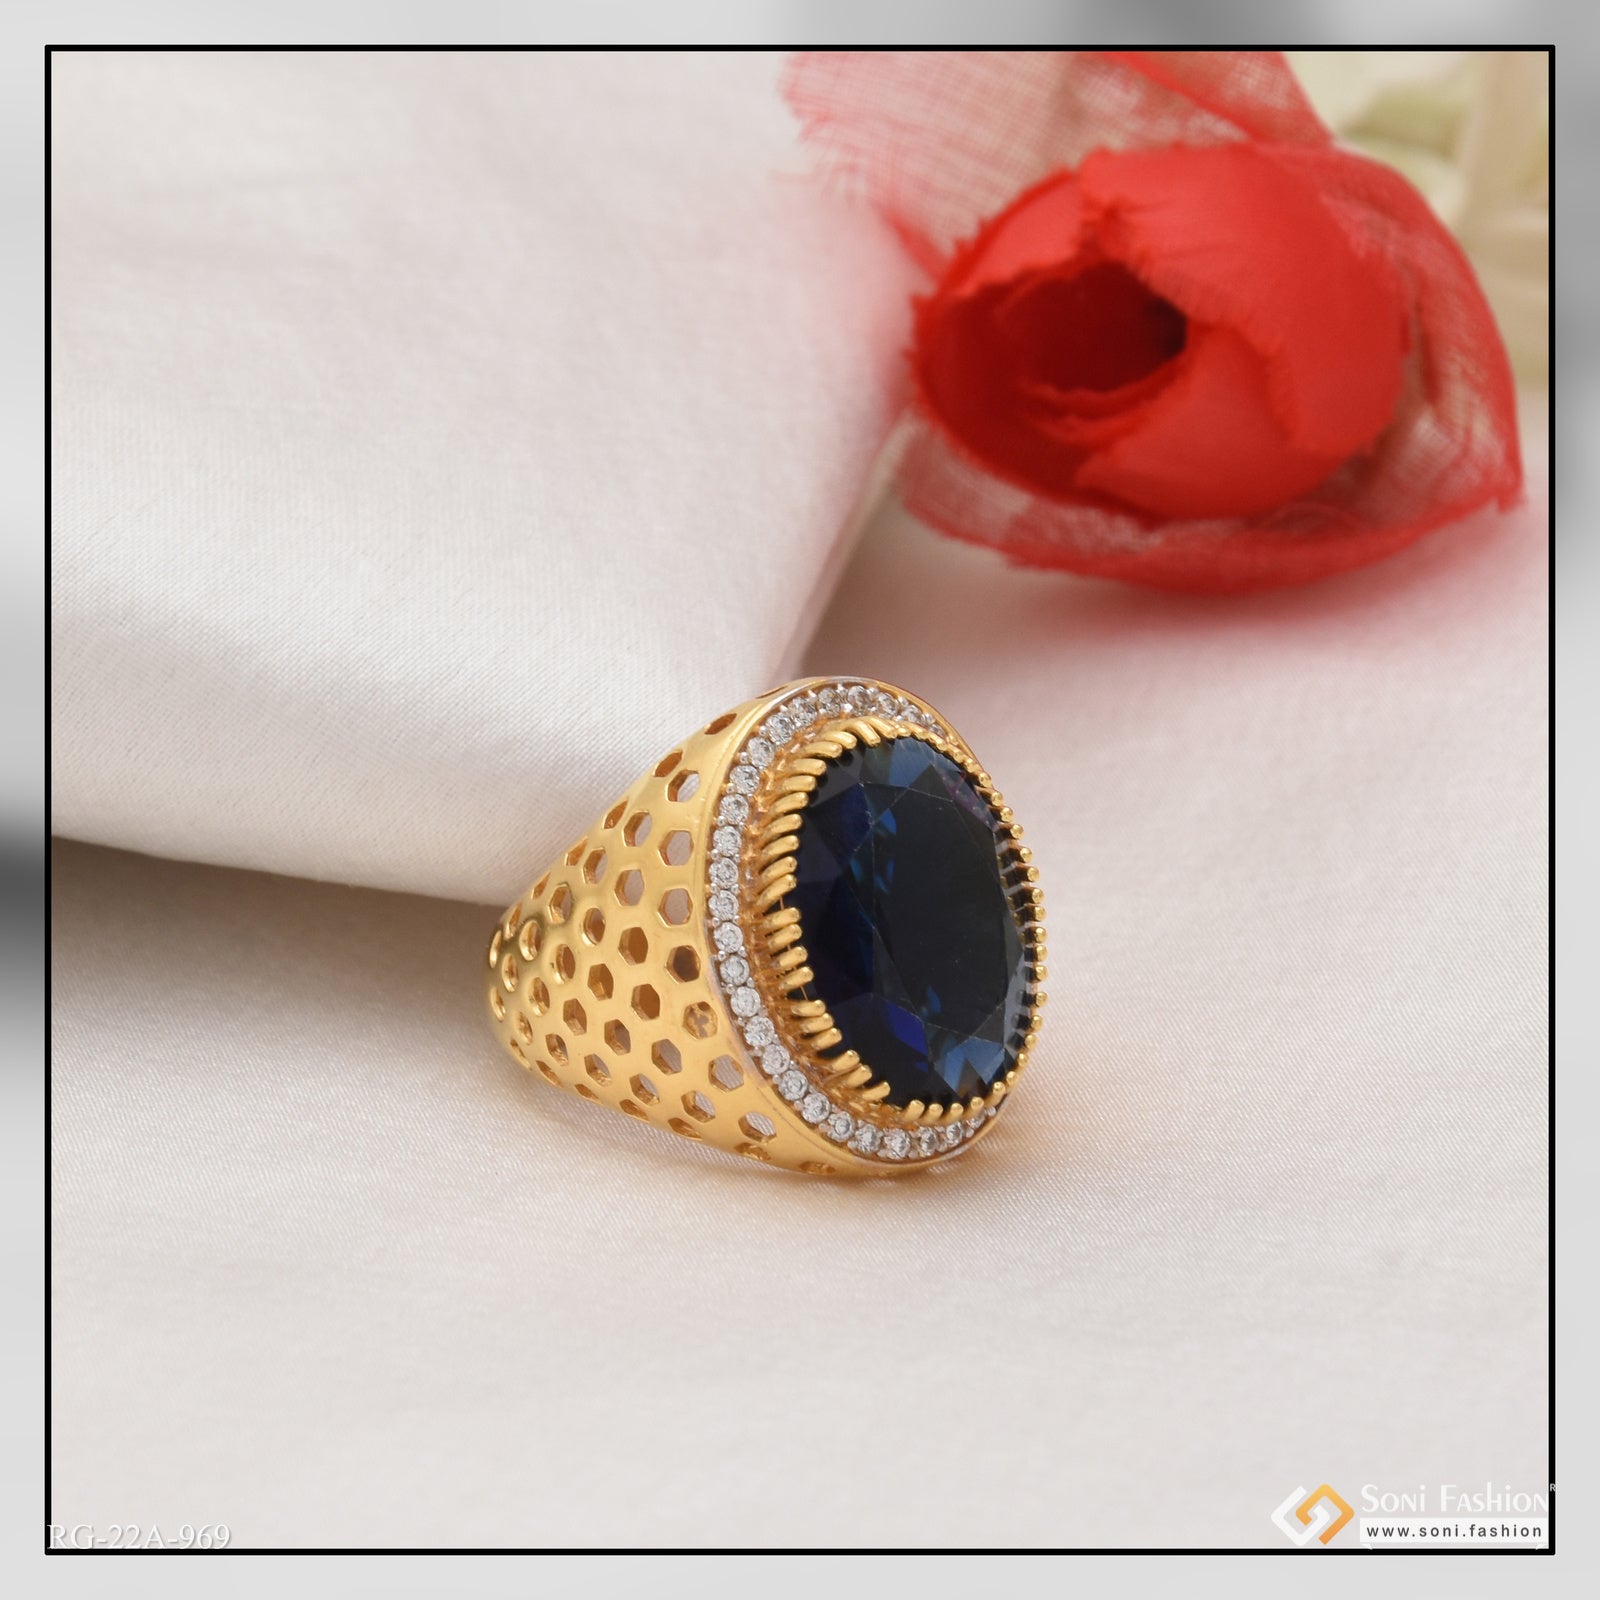 1 Gram Gold Forming Blue Stone with Diamond Best Quality Ring for Men - Style A969